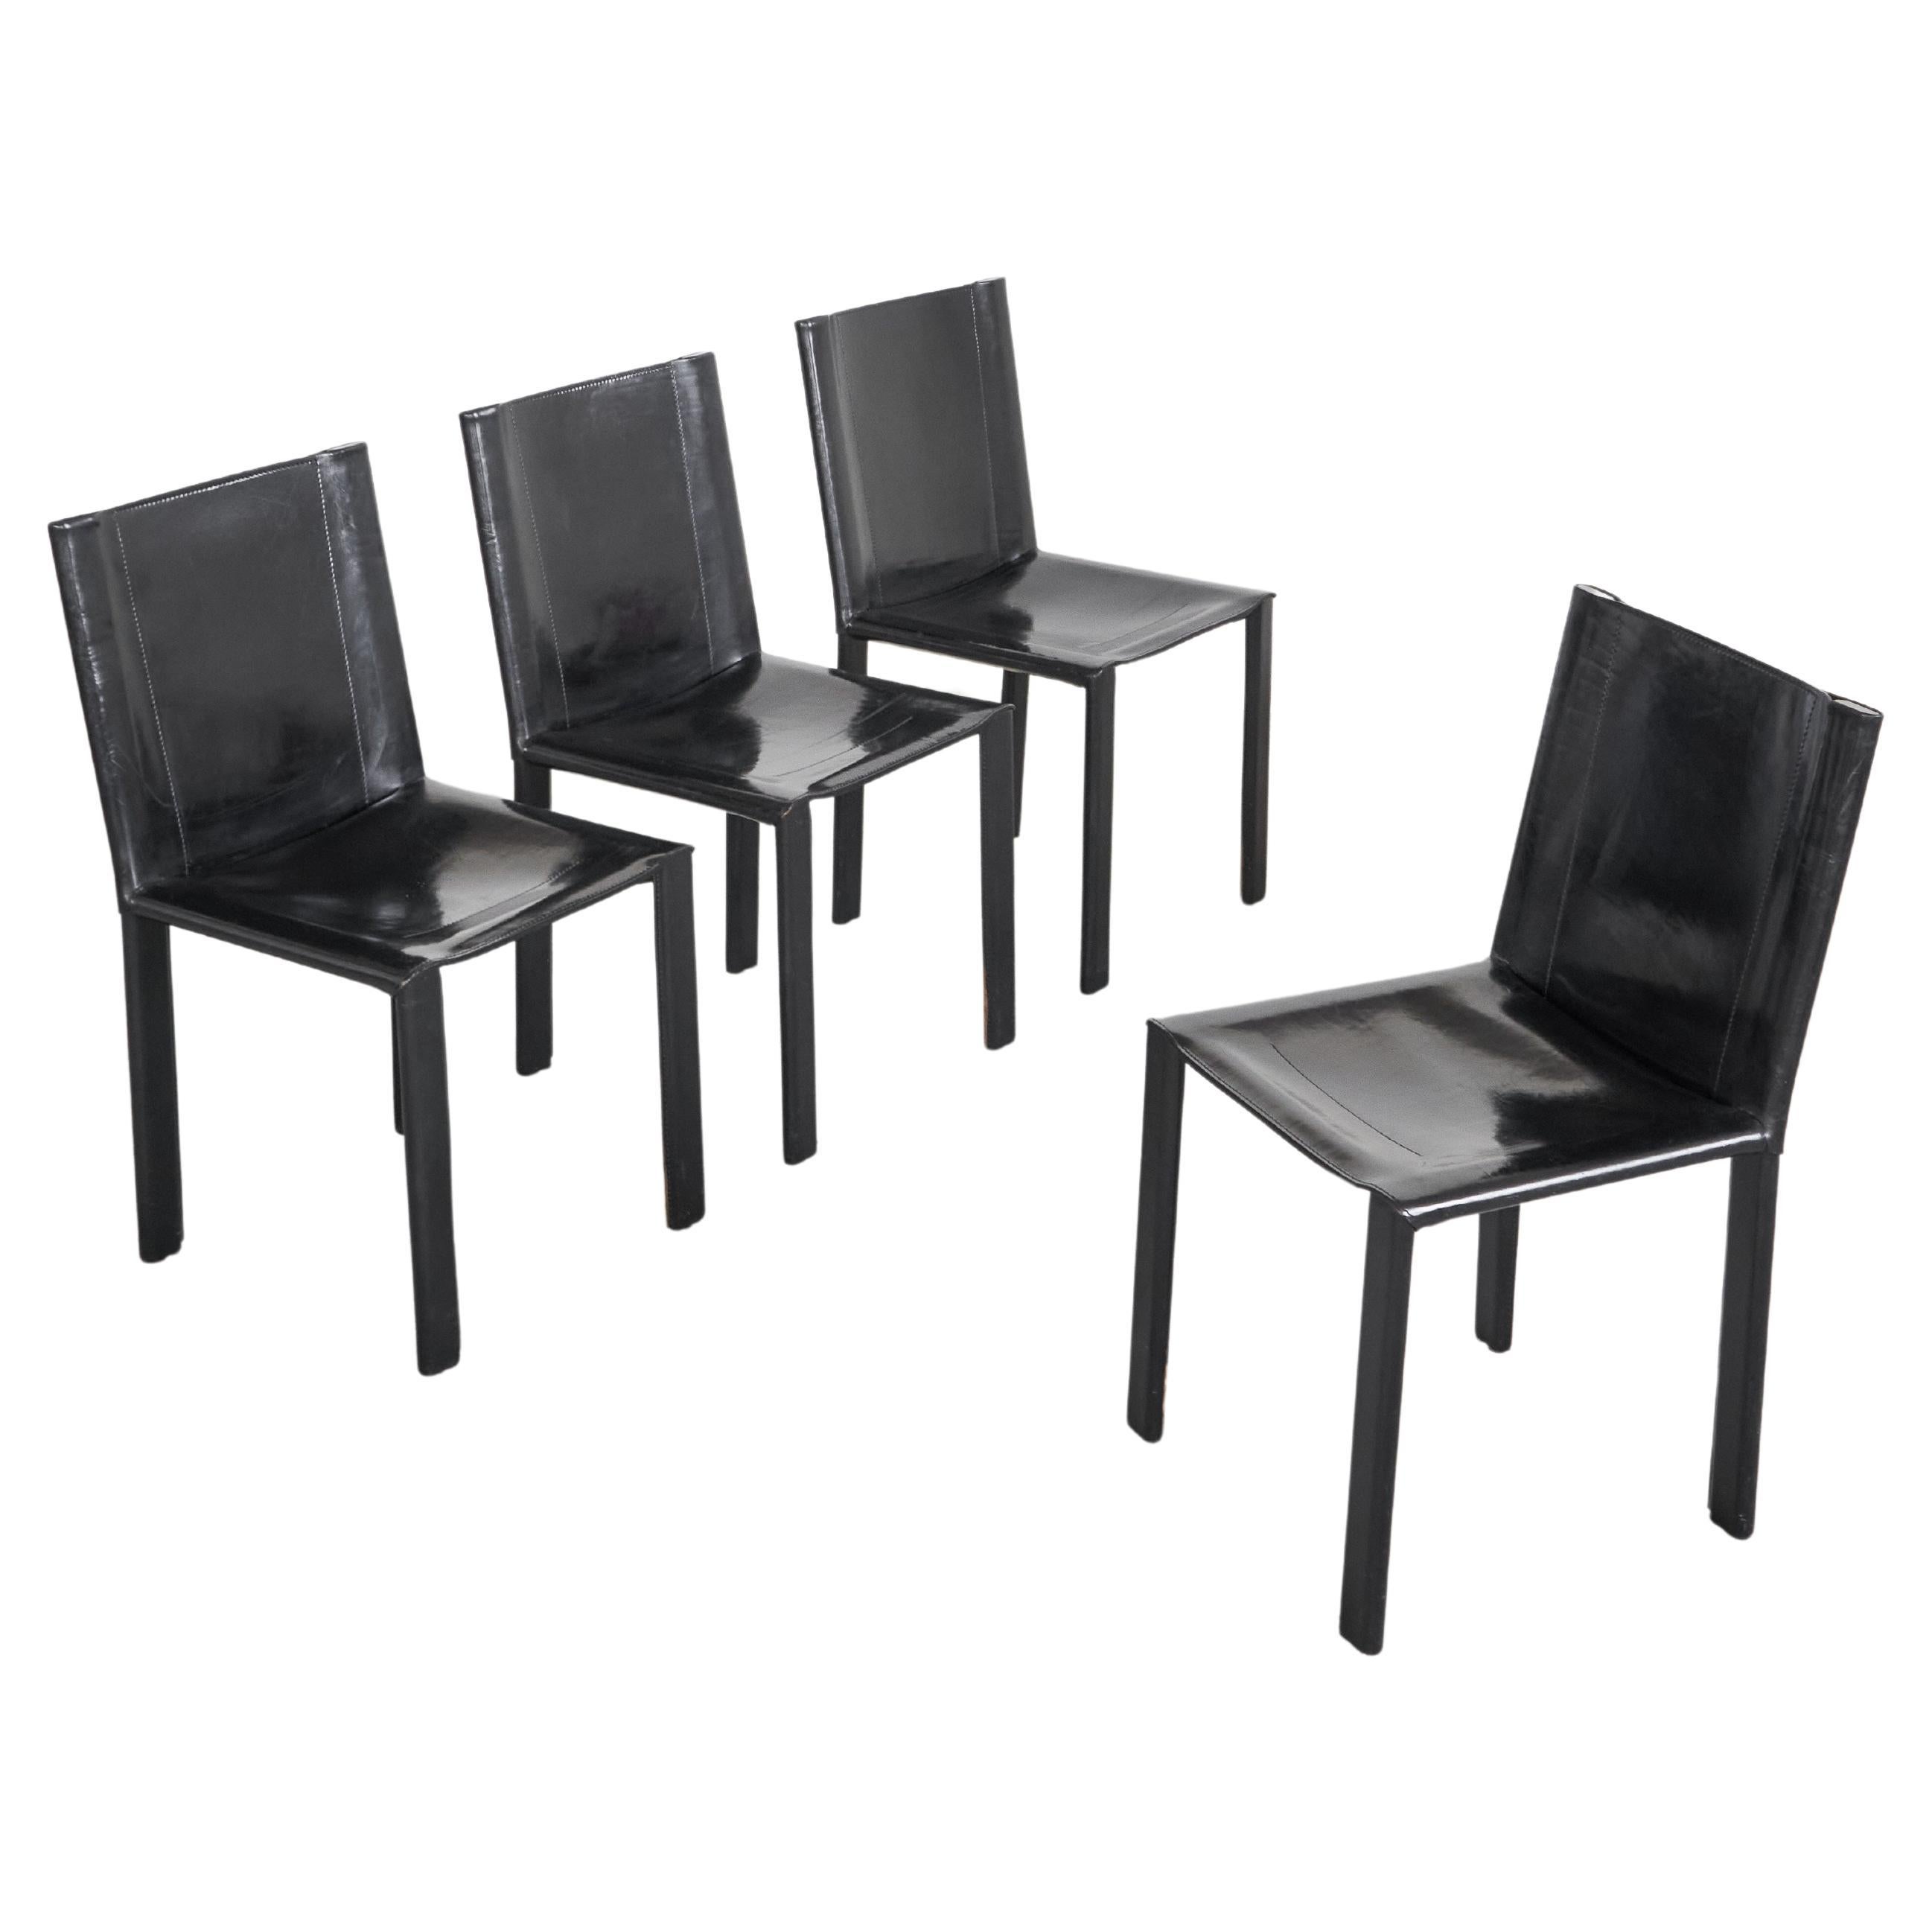 Set of 4 Black Leather Chairs by Matteo Grassi, Italy, 1990s